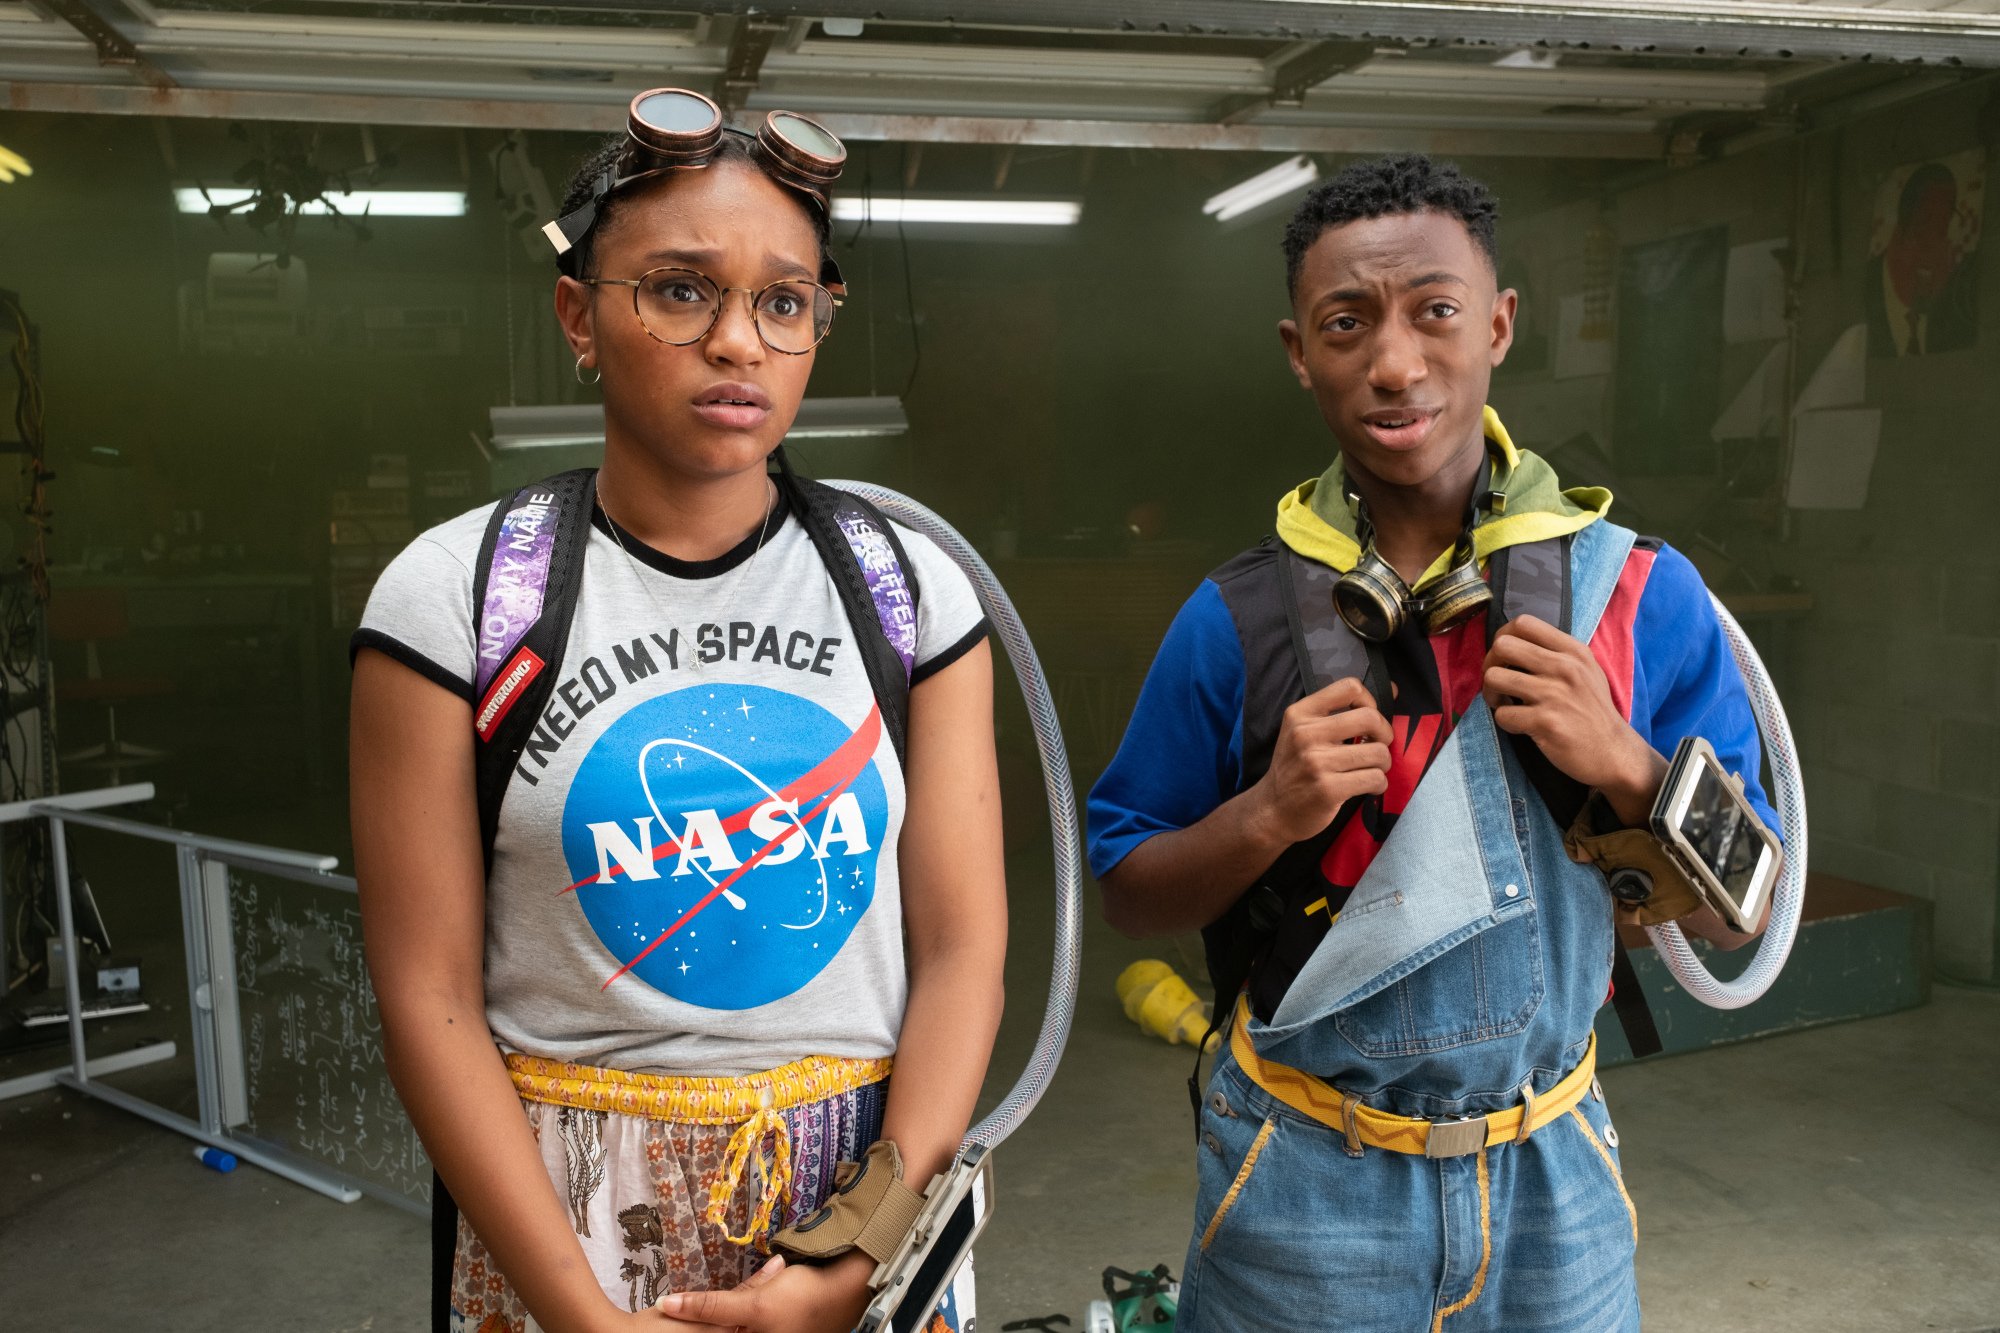 Two young people in backpacks, one wearing a NASA t-shirt, stand in a garage.